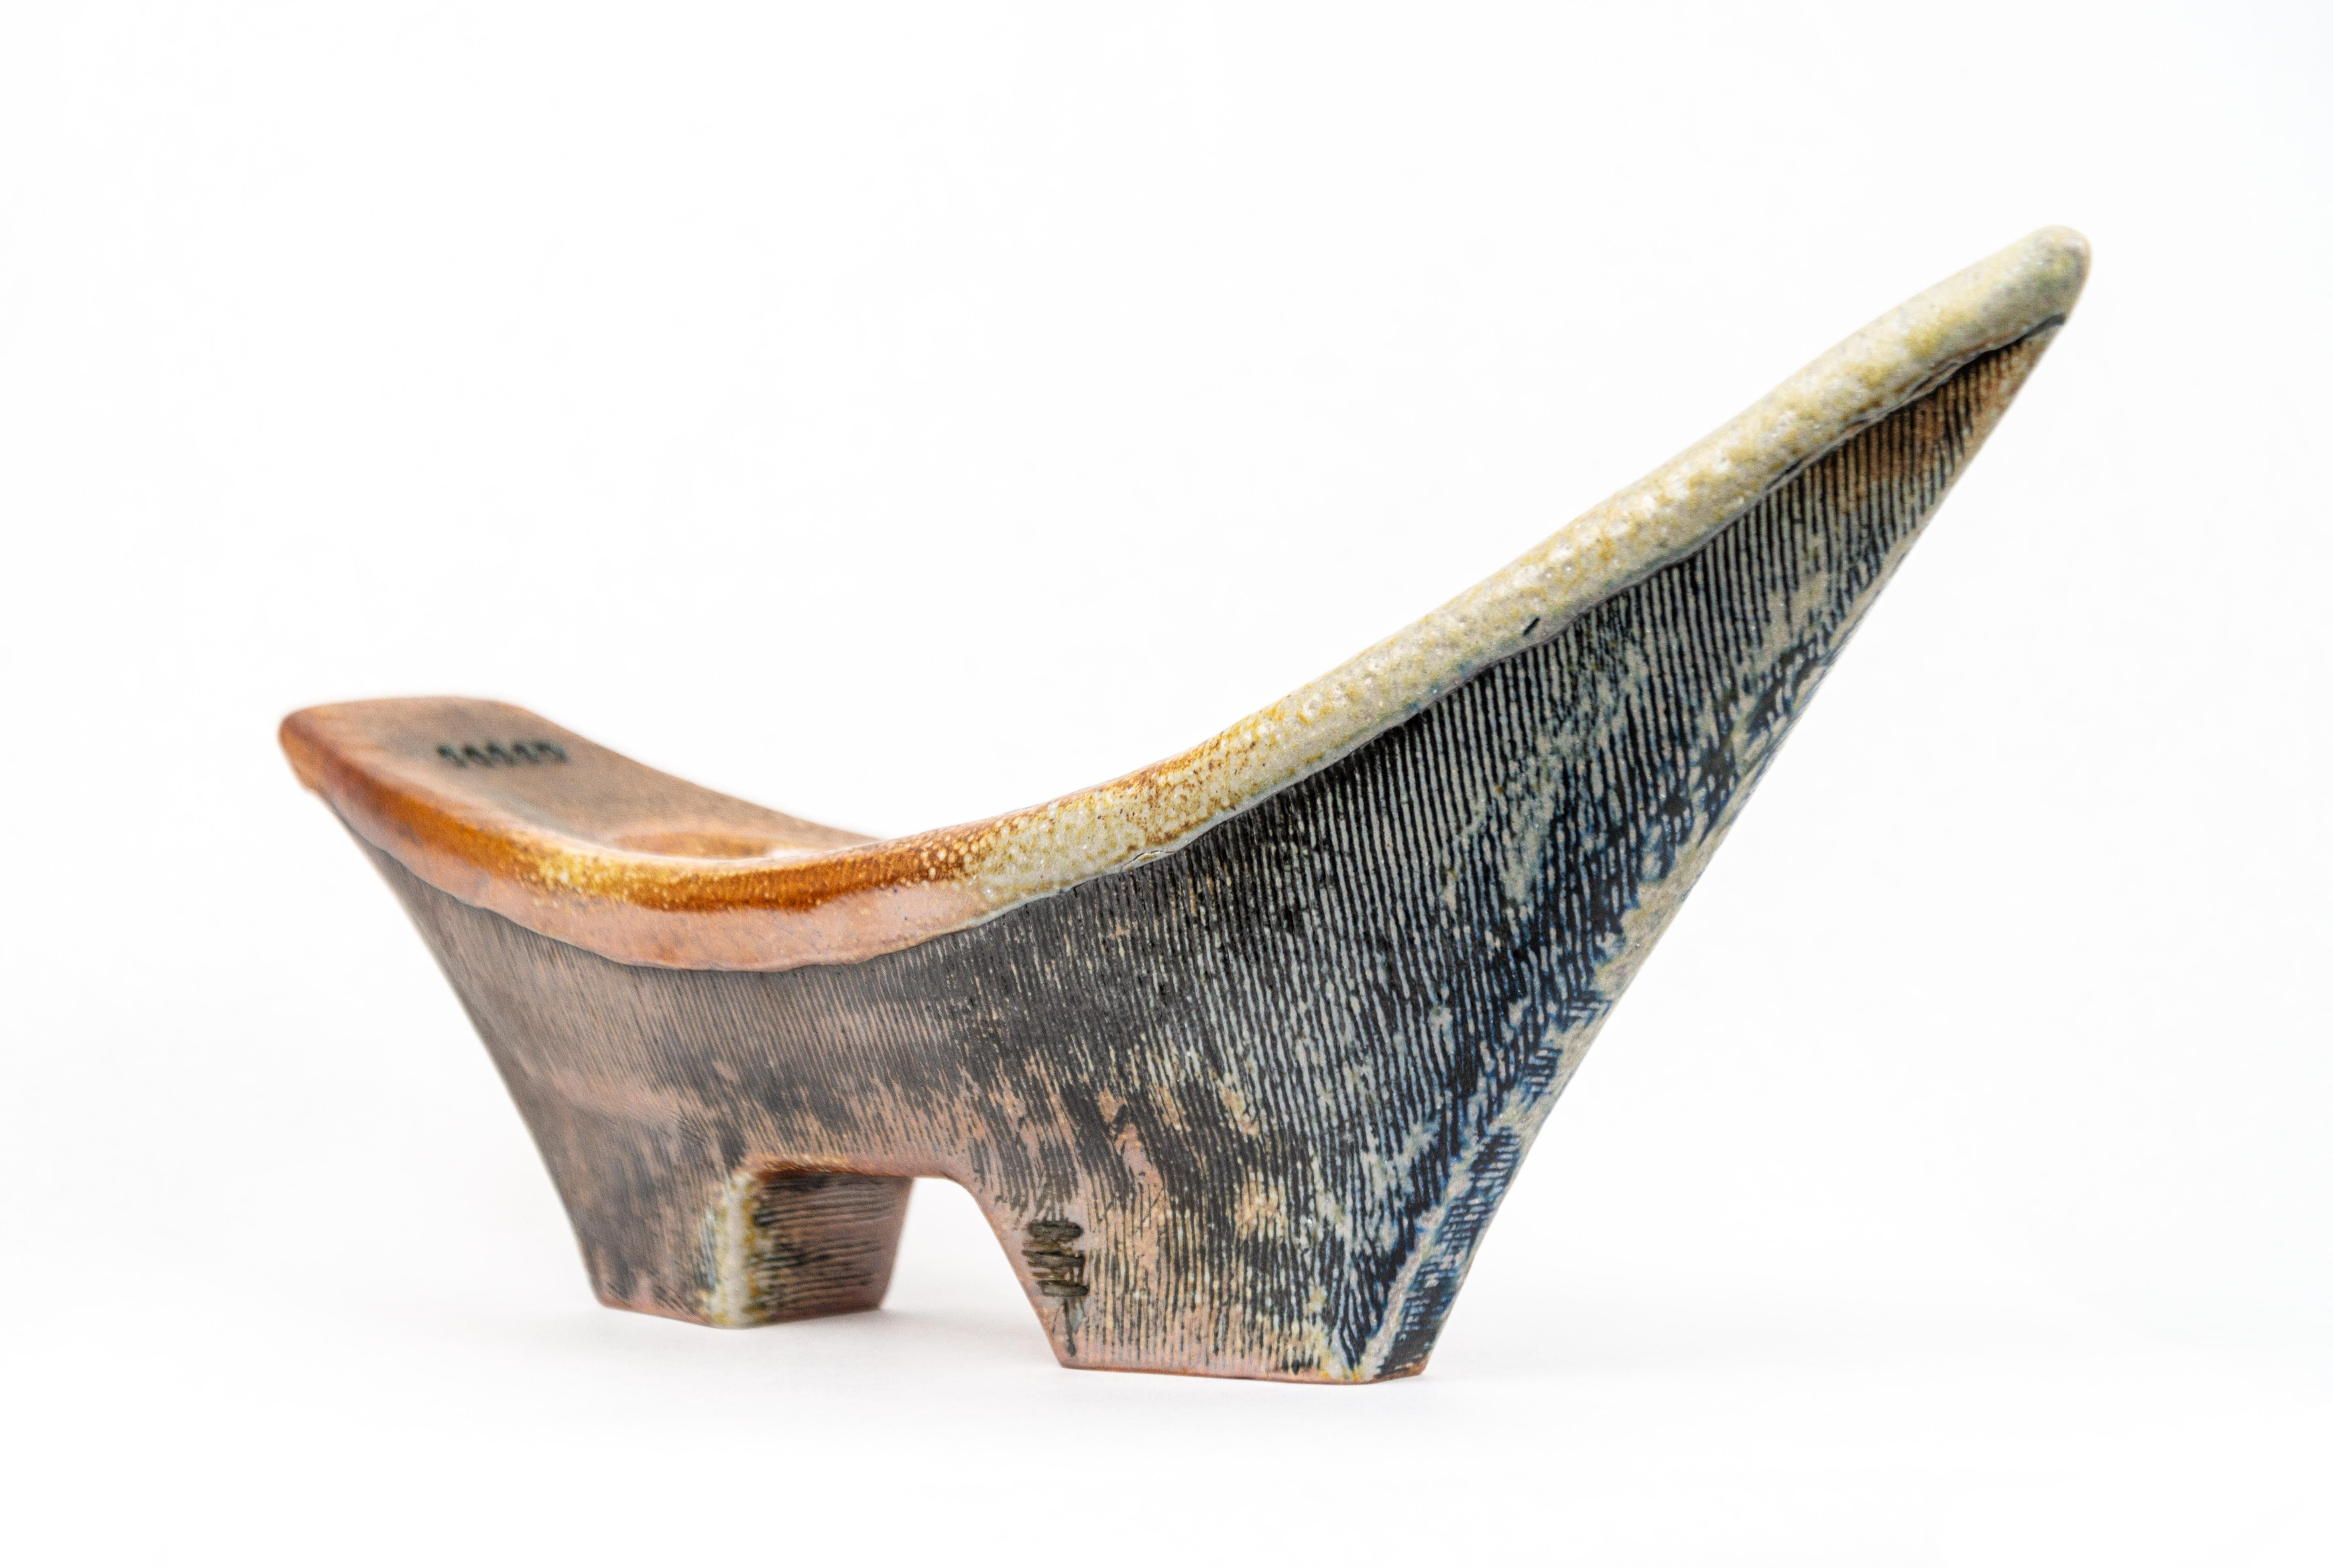 Striking in form, colour and texture, this is one of a new series of clay vessels created by American ceramicist Heather Allen Hietala. The boat-shaped vessel symbolizes life’s journey for the artist. The colour palette is earthy…this one features a